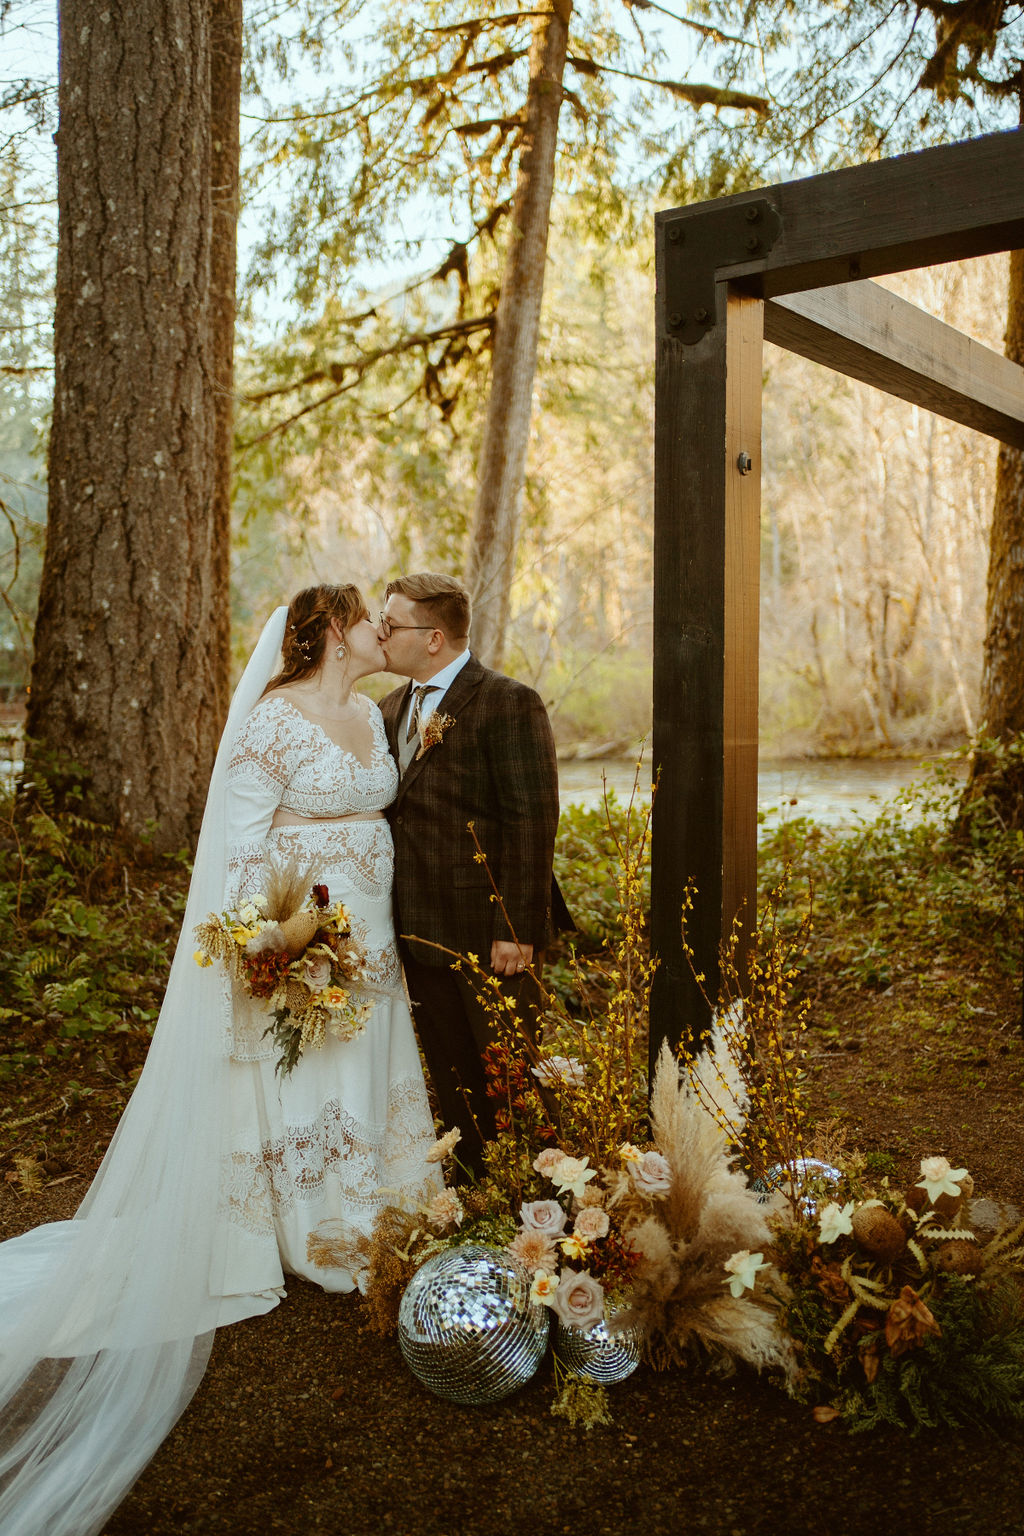 The bride and groom kiss to the side of the wooden arch standing behind the floral pieces and disco balls 